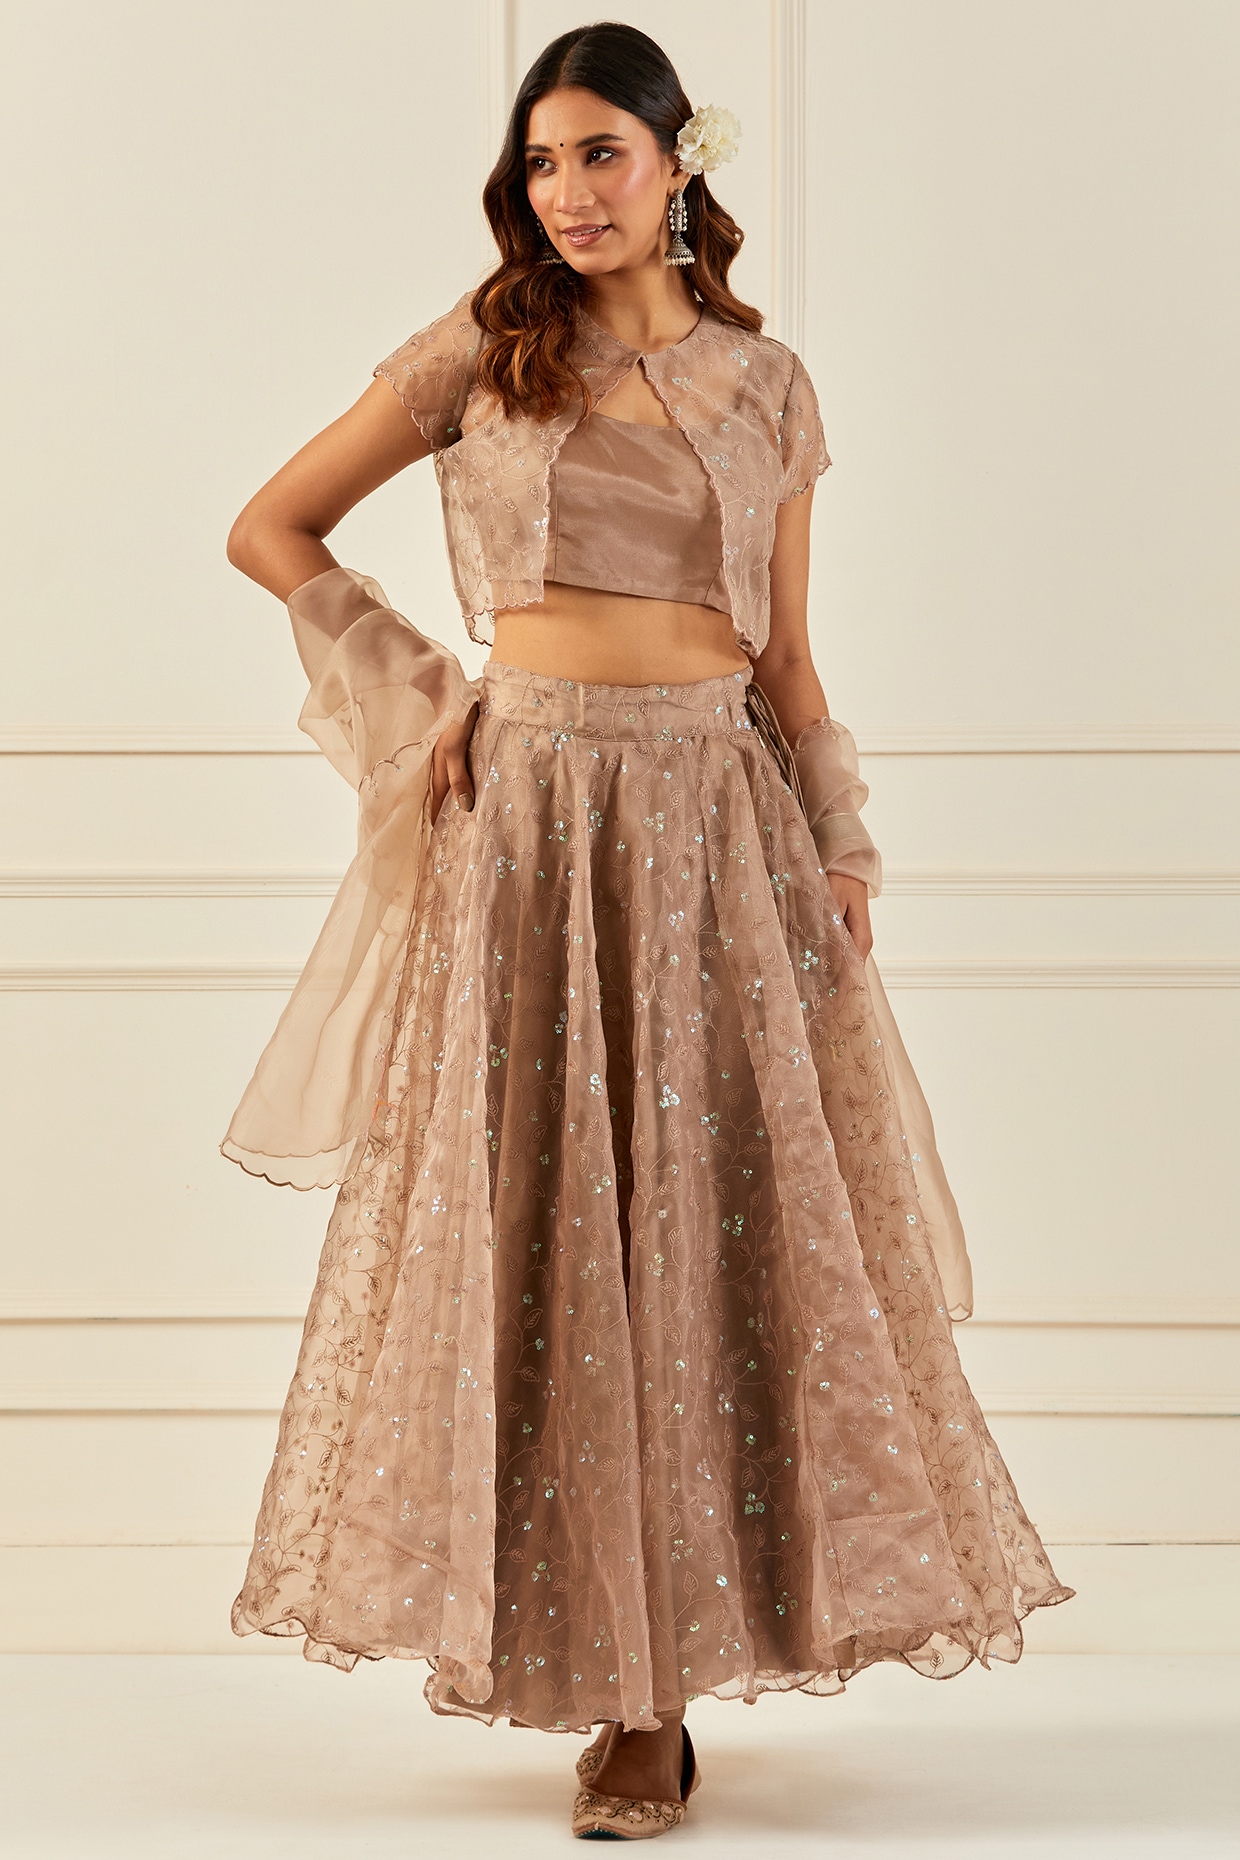 Beige Satin Readymade Printed Skirt With Shirt Top 158679 | Printed skirts,  Fashion design dress, Party wear indian dresses